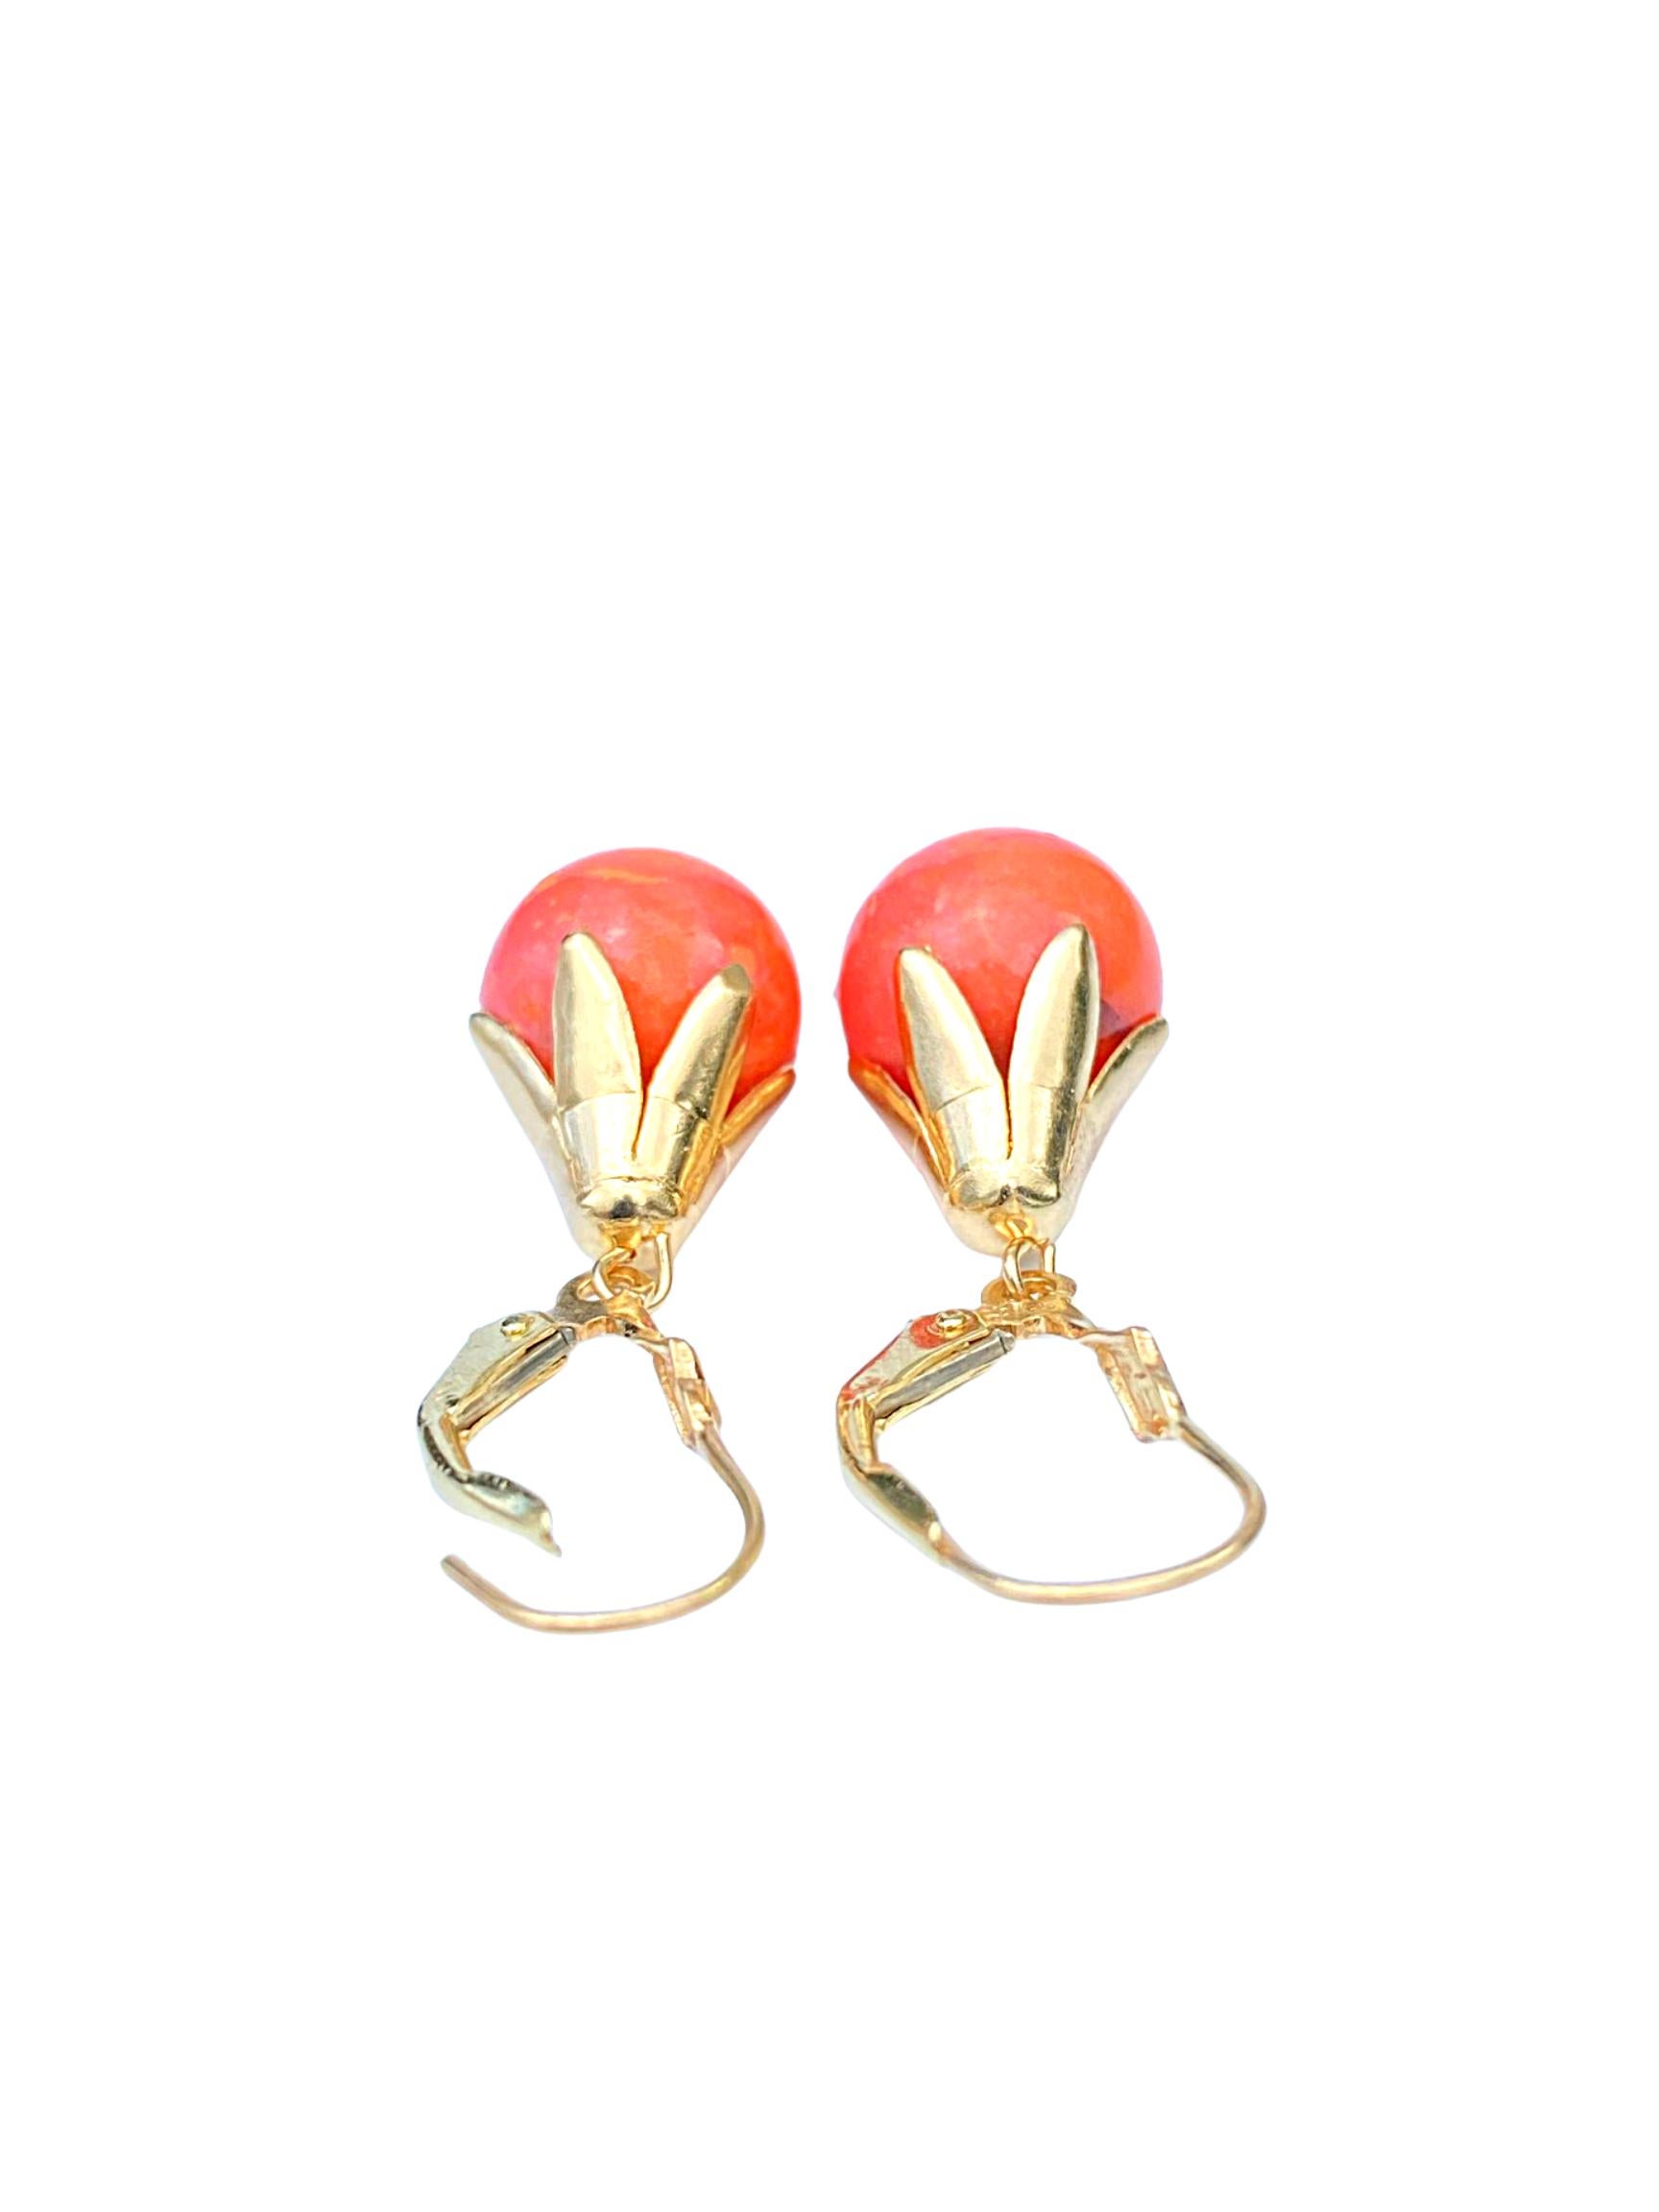 Oval Cut Red Coral and 14K Yellow Gold Drop Earrings